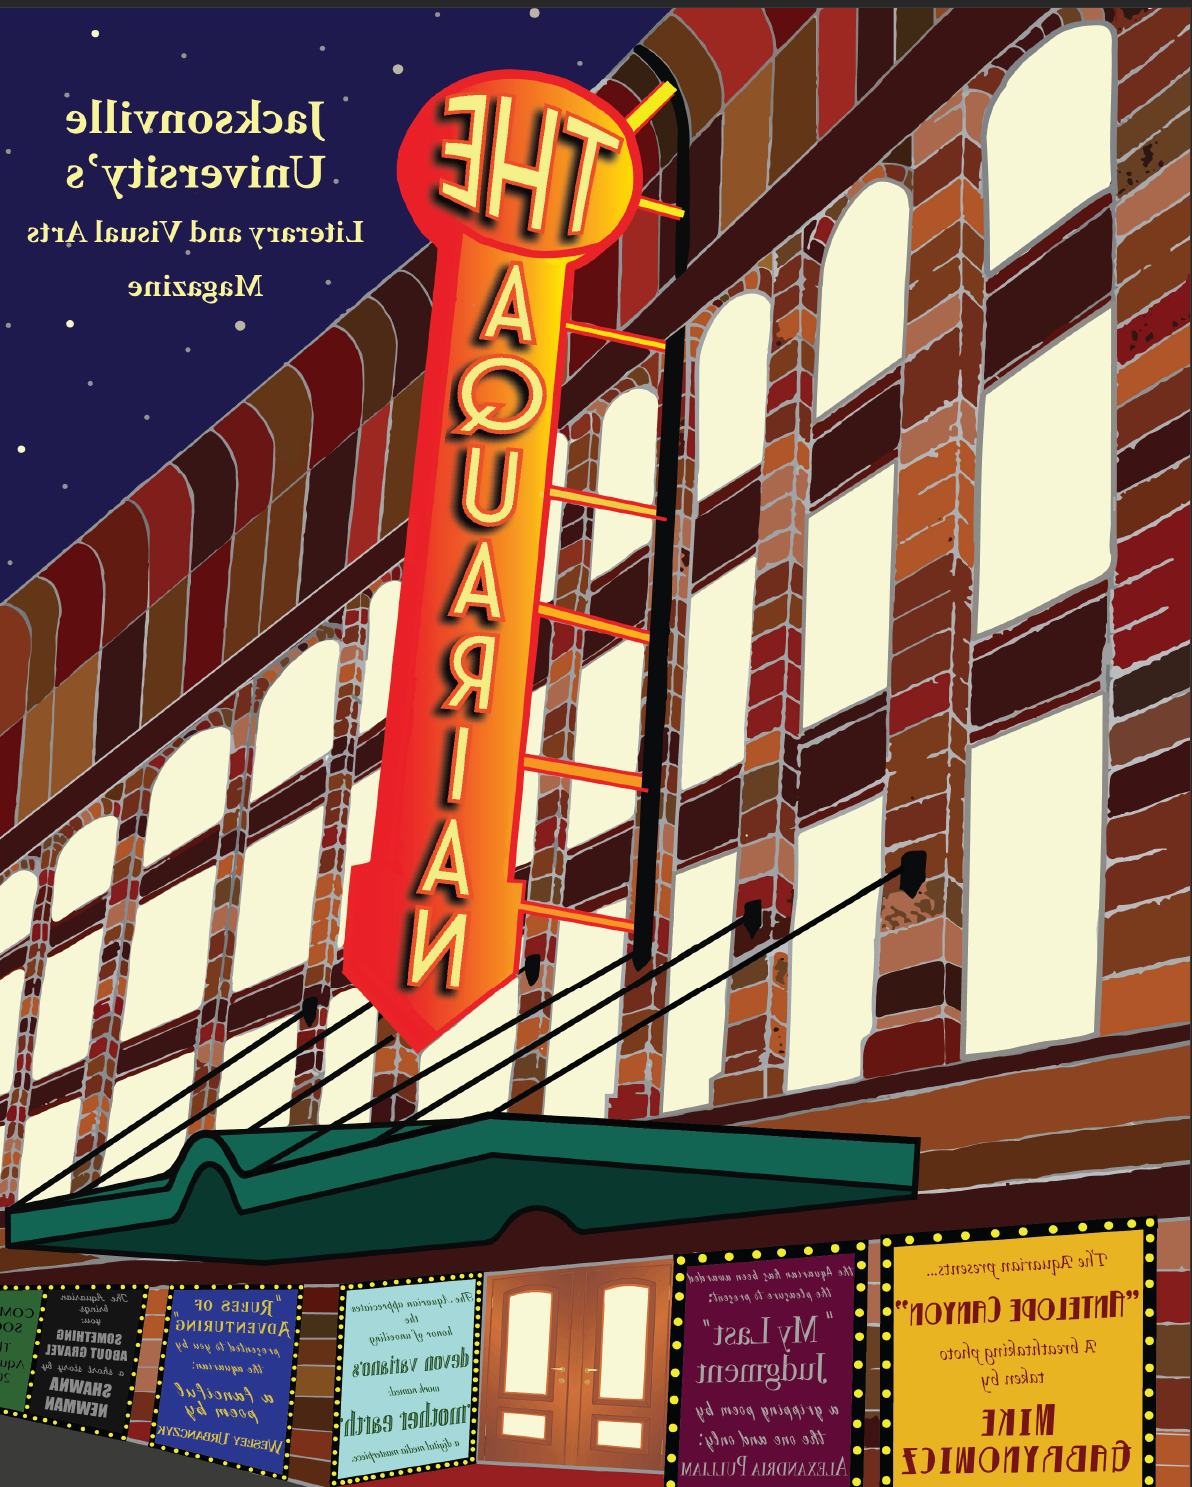 2018 cover. Depicts a New York Broadway style red brick building with a lit up sign that says "The 宝瓶座时代的"